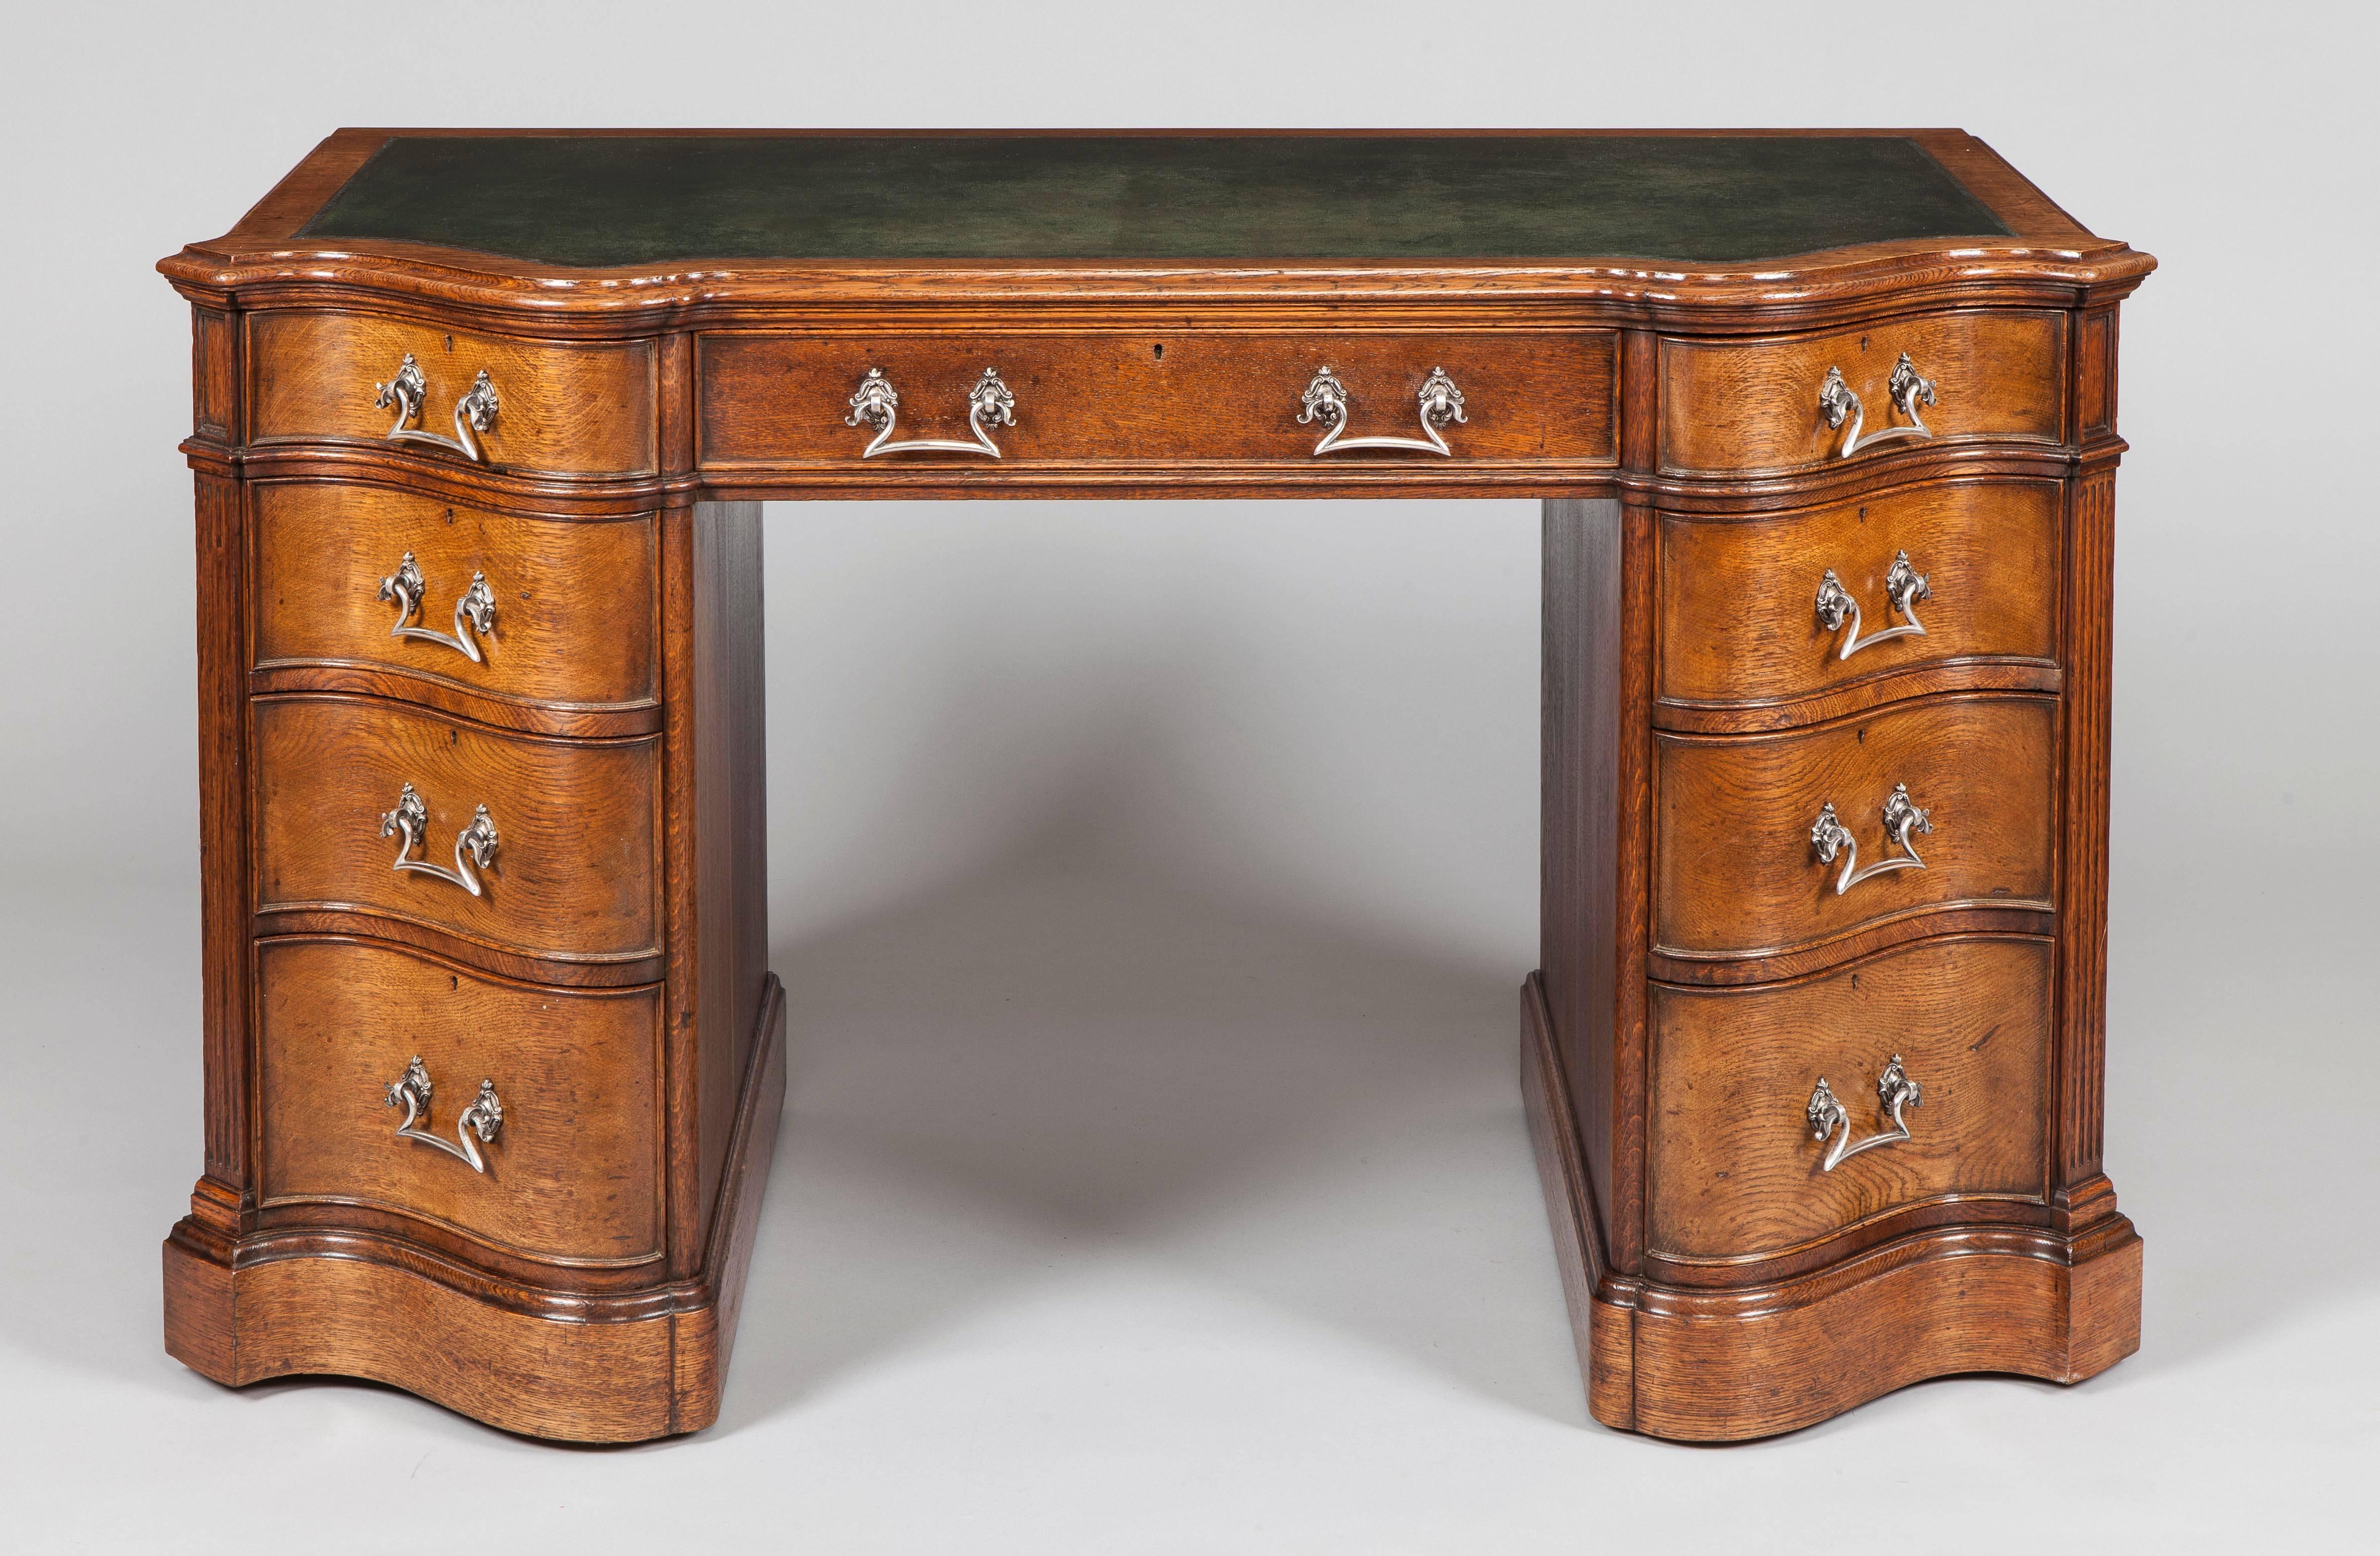 An Oak Pedestal Desk
After a design by Thomas Chippendale

Of freestanding serpentine form, rising from a plinth base, the pedestals each house four ‘S shaped’ front drawers with canted corners and carved fluted pilasters, a central drawer on top,